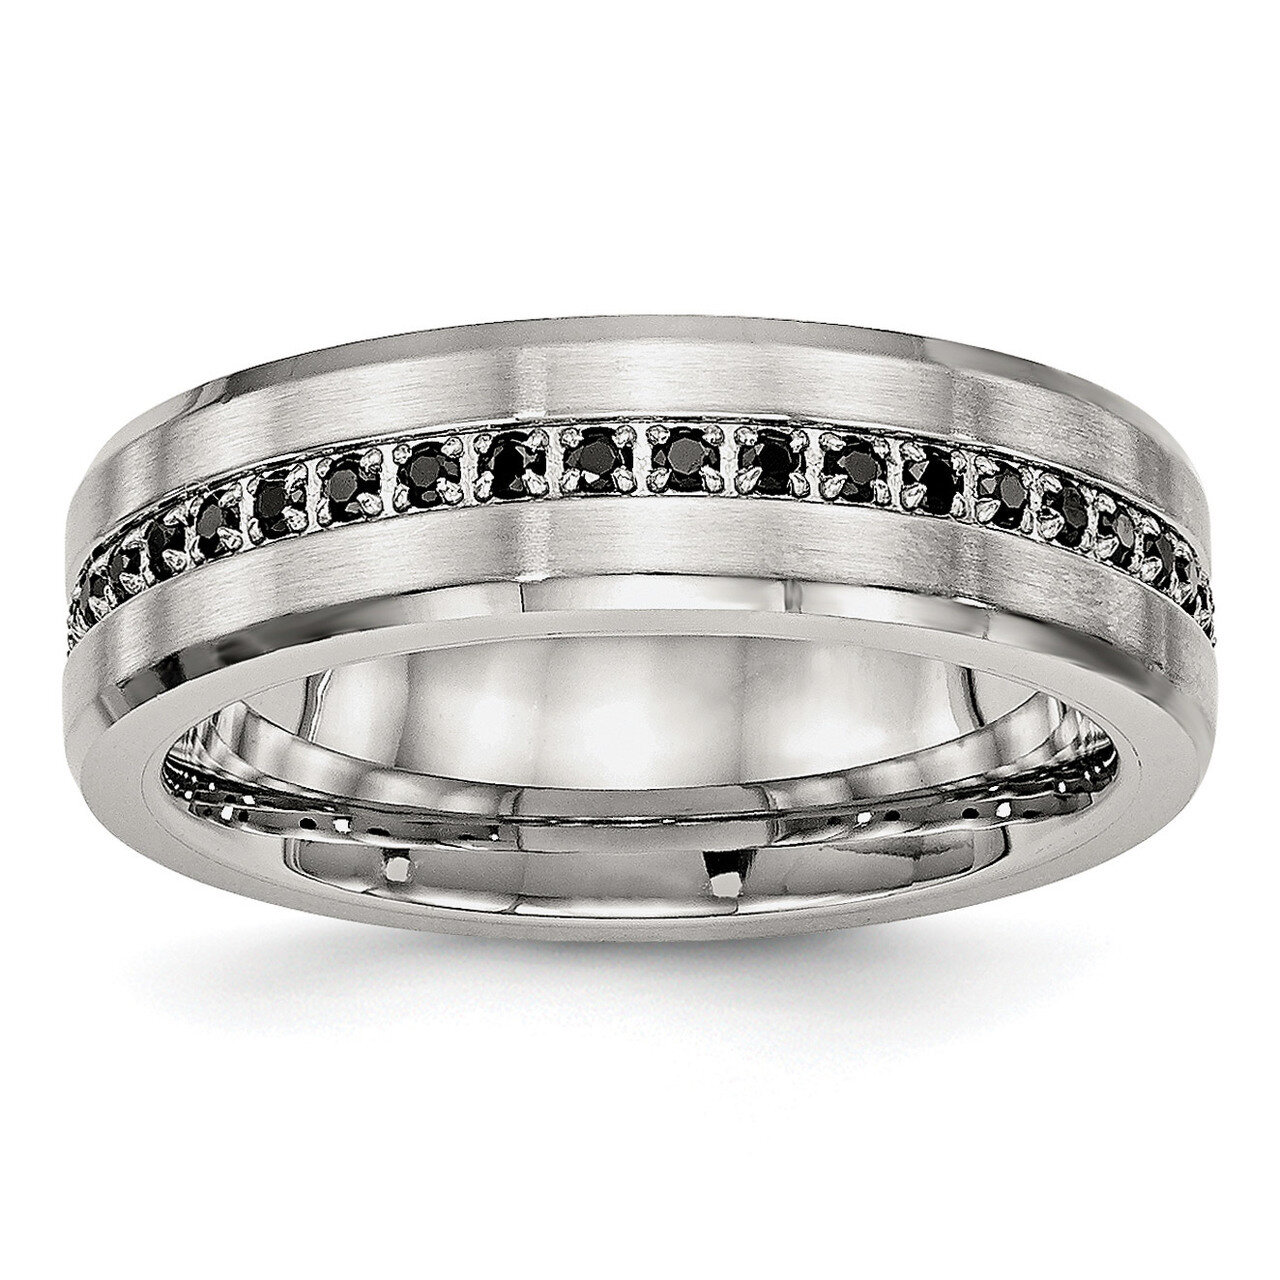 Black Diamond CZ Ring Stainless Steel Brushed and Polished SR546